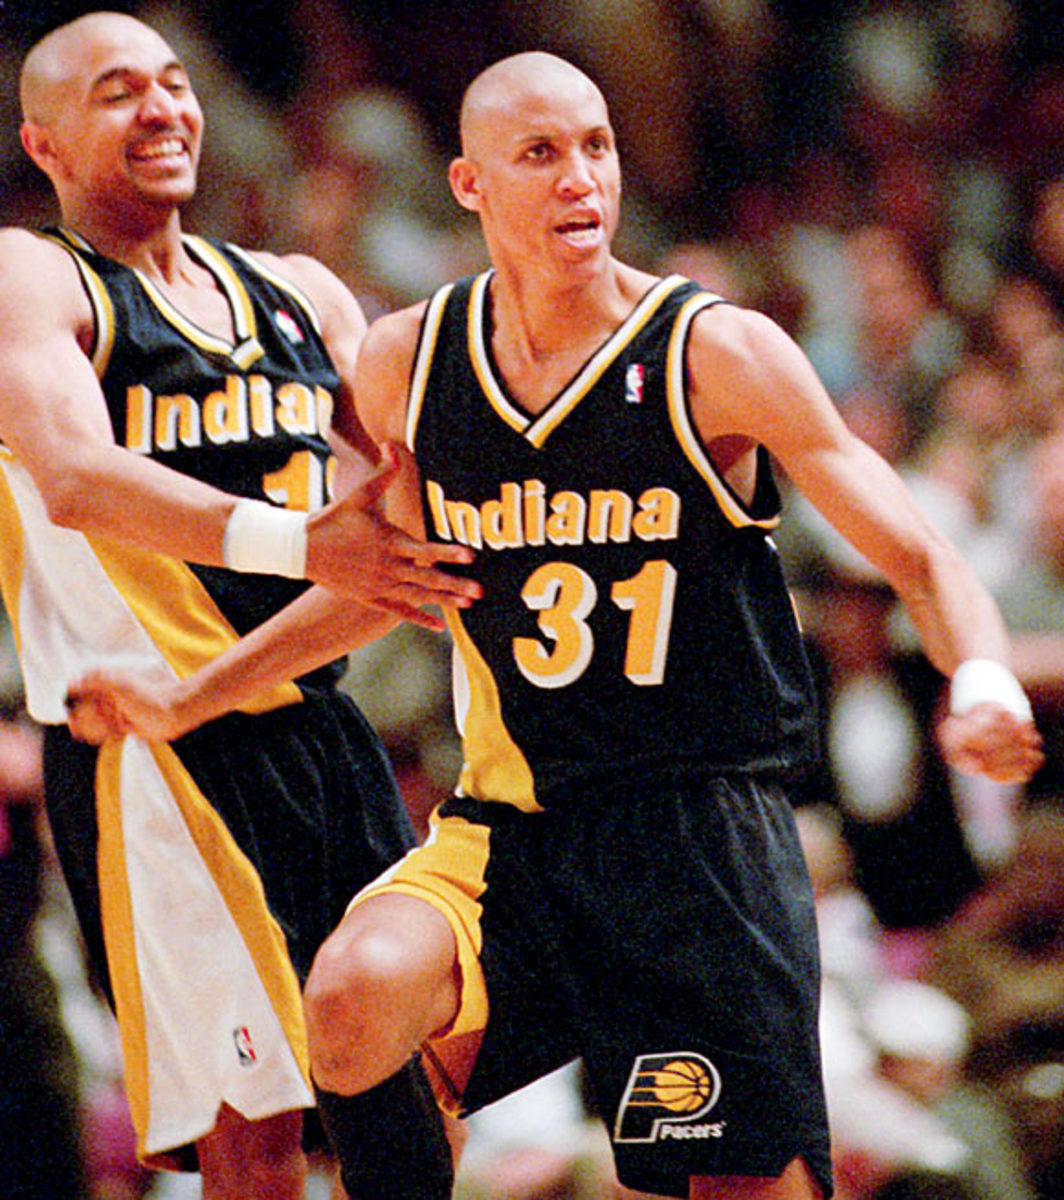 1995 -- Reggie Miller scores 8 points in 8.9 seconds to beat the Knicks